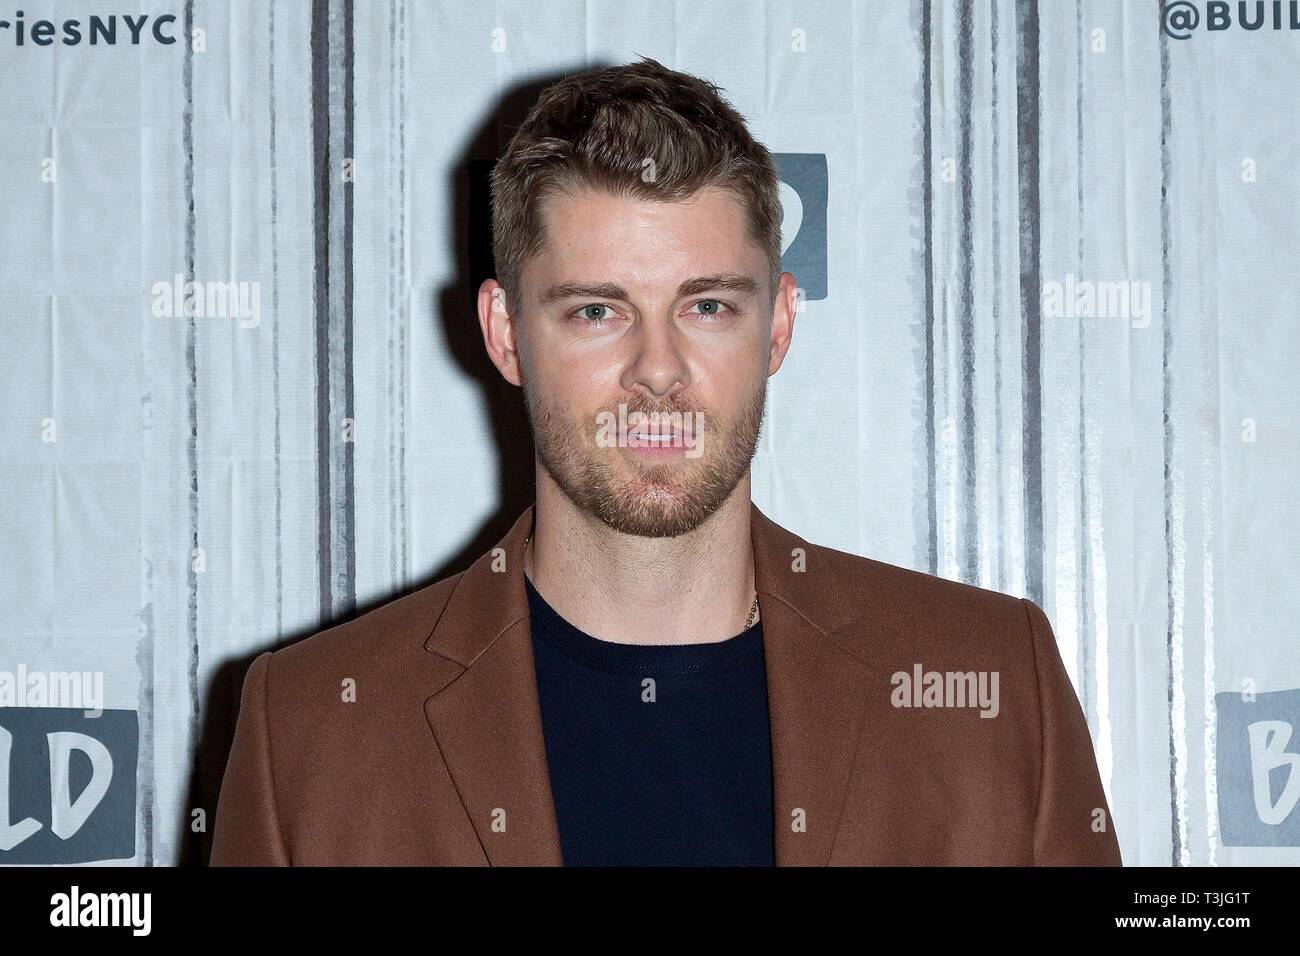 New York, NY, USA. 9th Apr, 2019. Luke Mitchell inside for AOL Build Series Celebrity Candids - TUE, AOL Build Series, New York, NY April 9, 2019. Credit: Steve Mack/Everett Collection/Alamy Live News Stock Photo